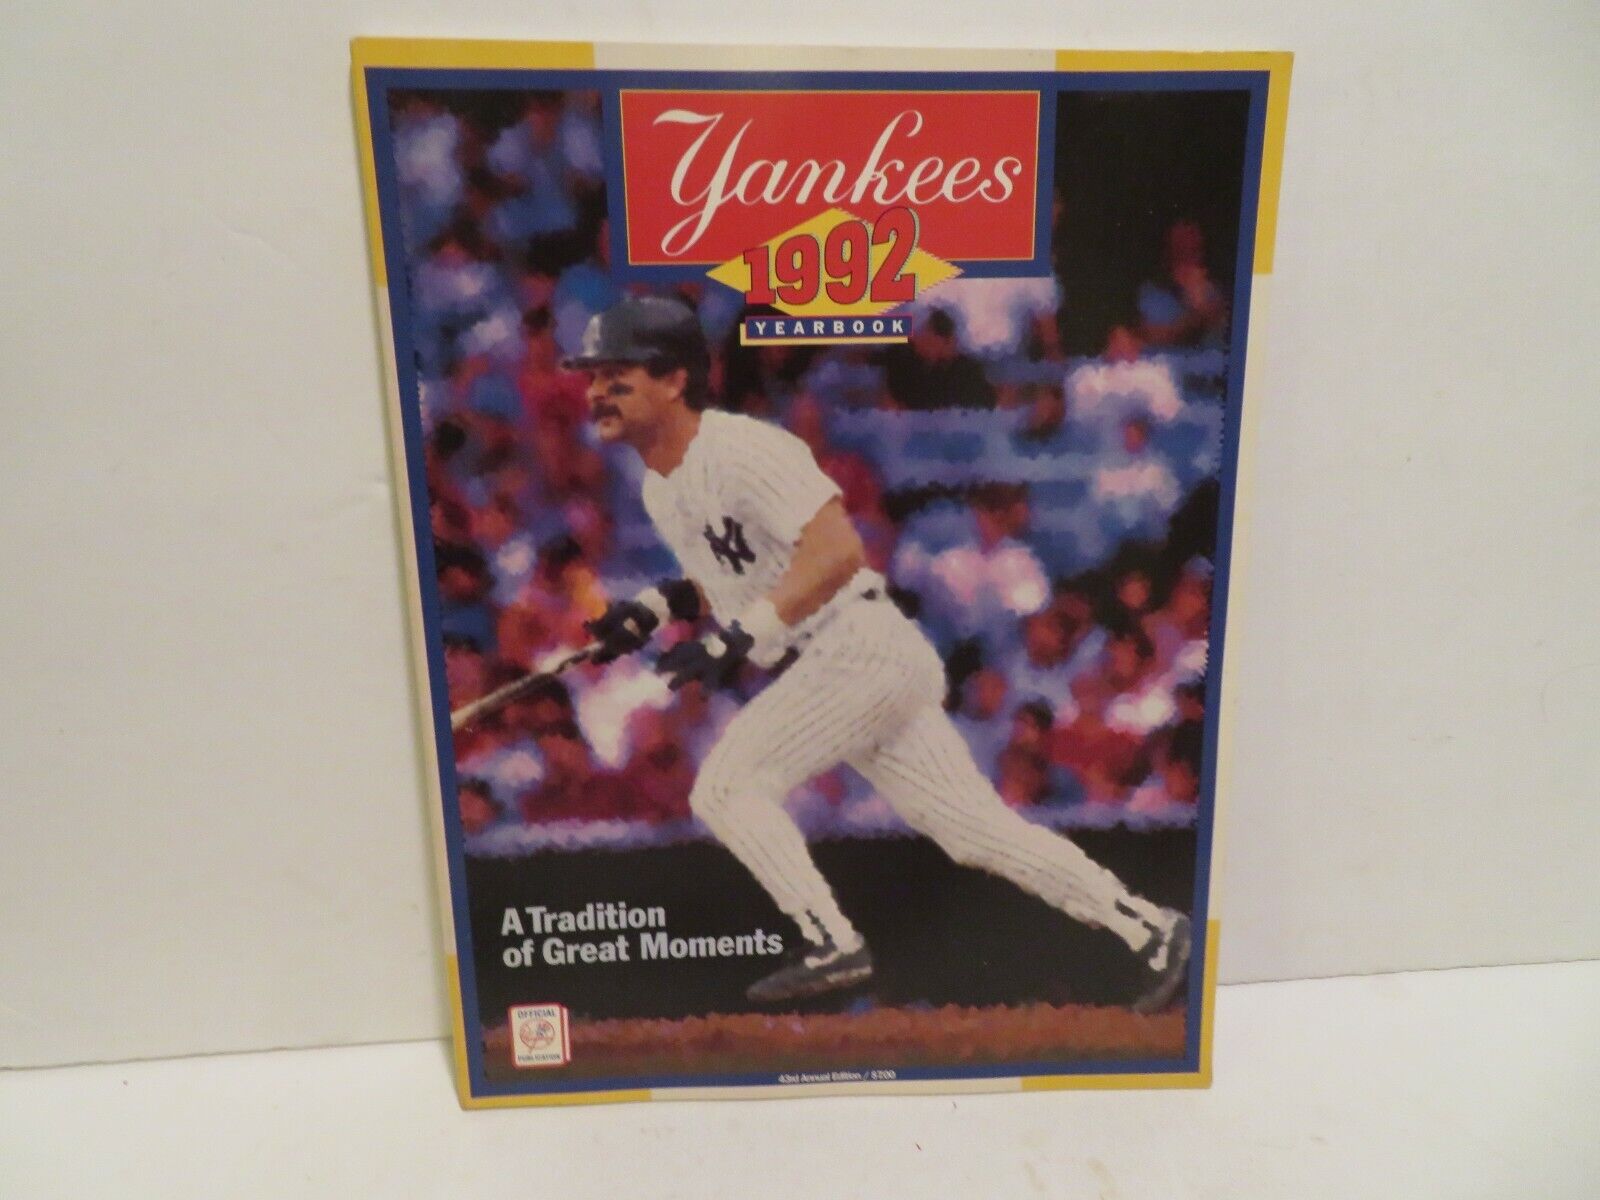 1992 New York Yankees Official Yearbook 140-Pages Don Mattingly Cover